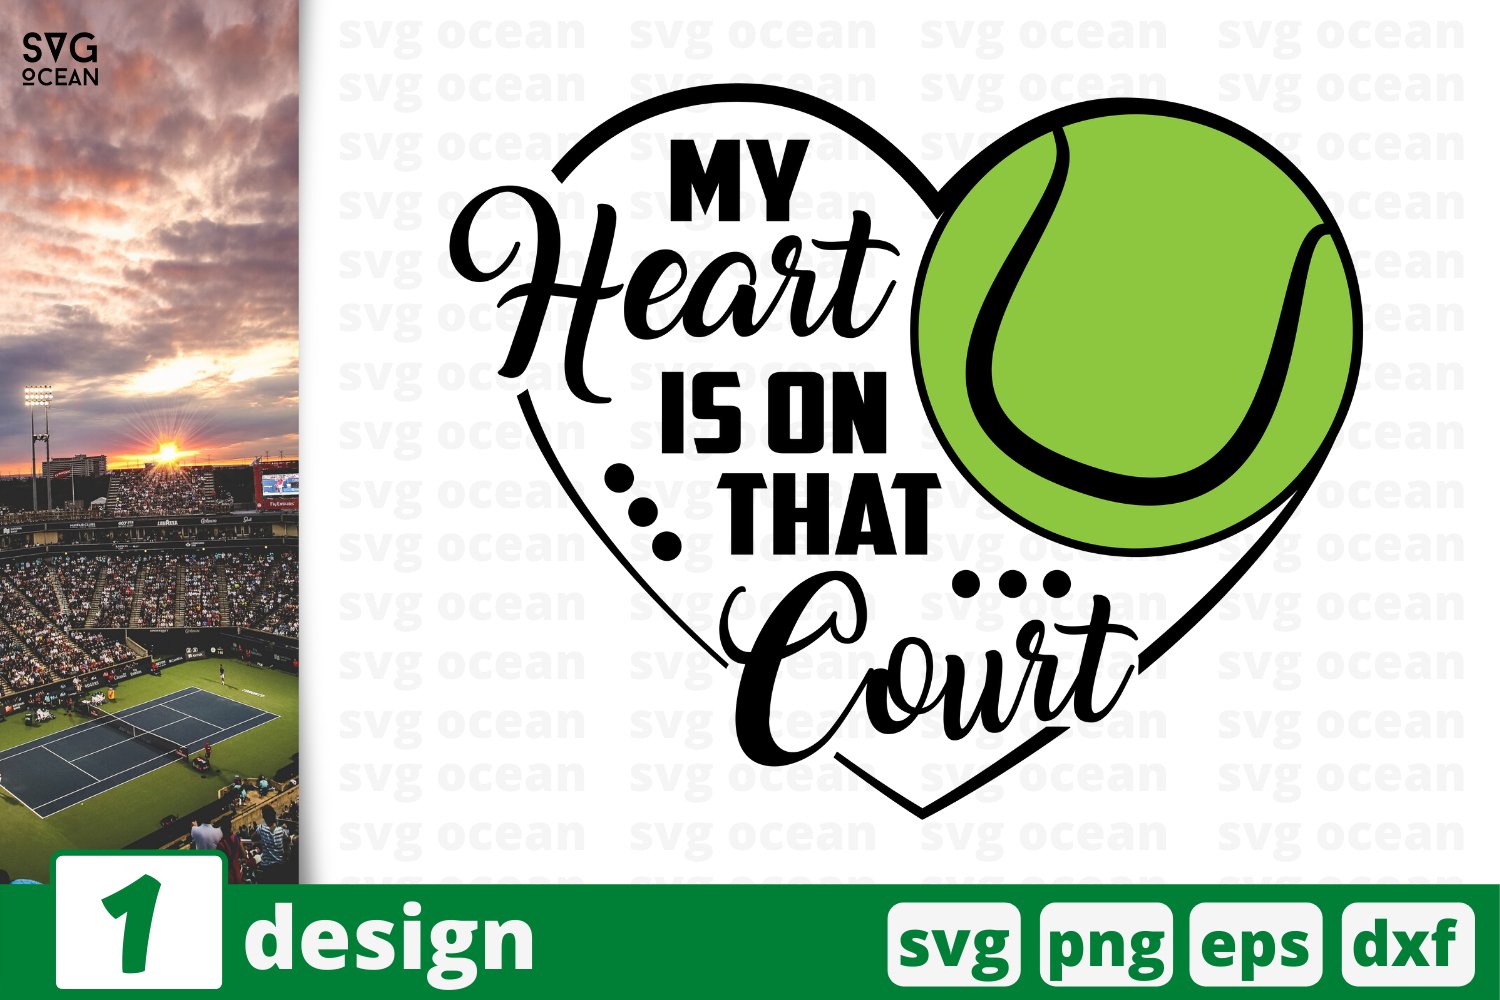 Green illustration with heart and tennis ball.